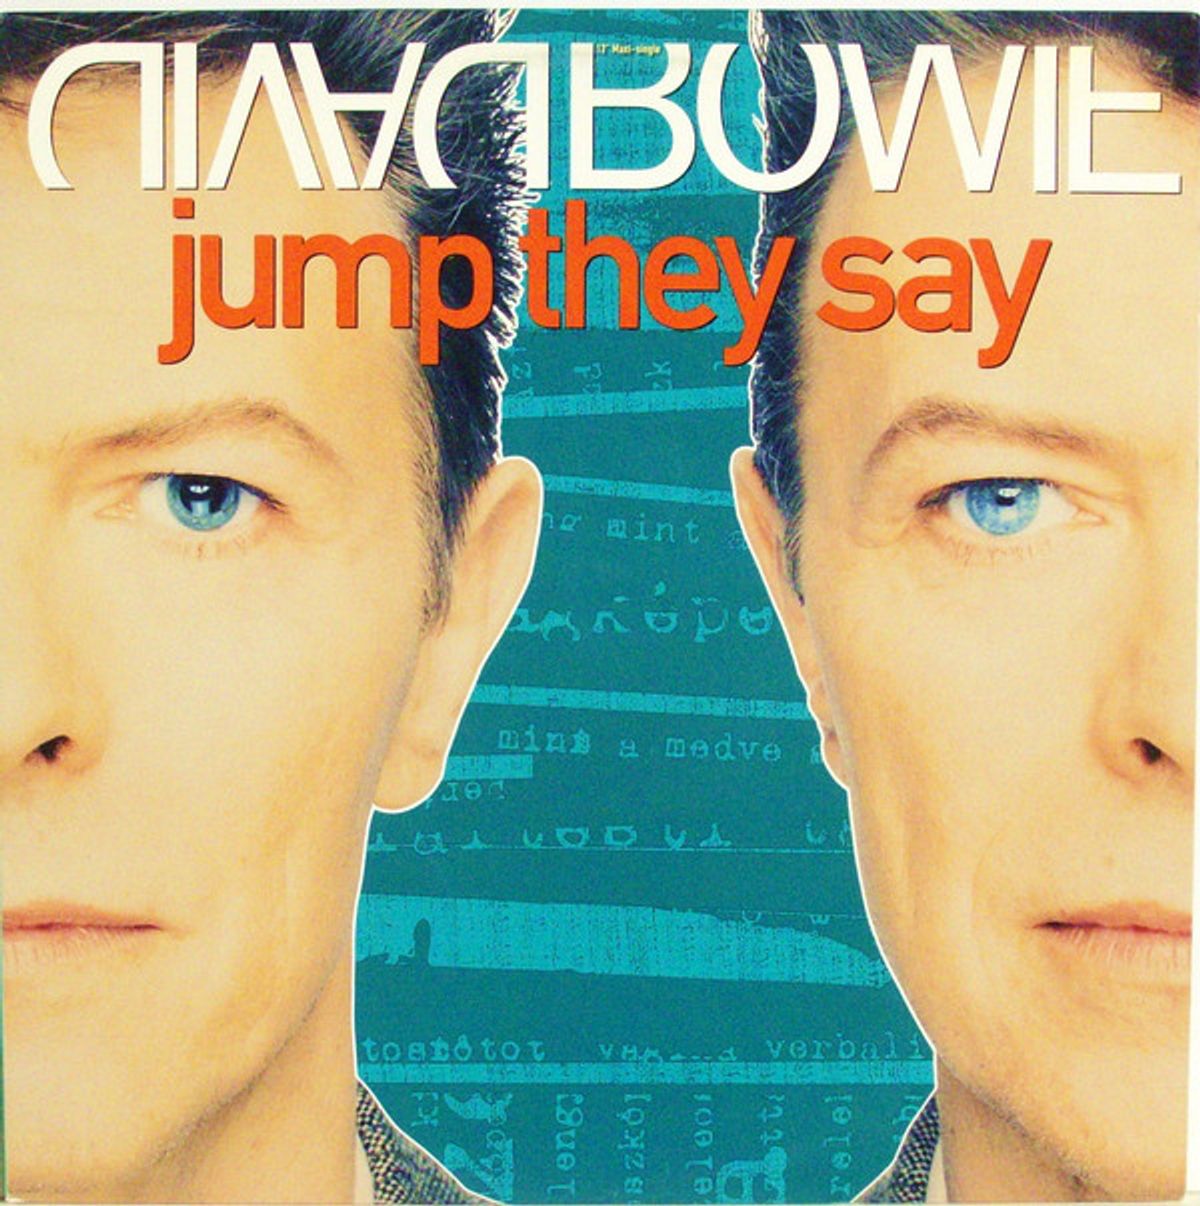 #BowieSteunt - David Bowie / Lester Bowie - Jump They Say (1993)